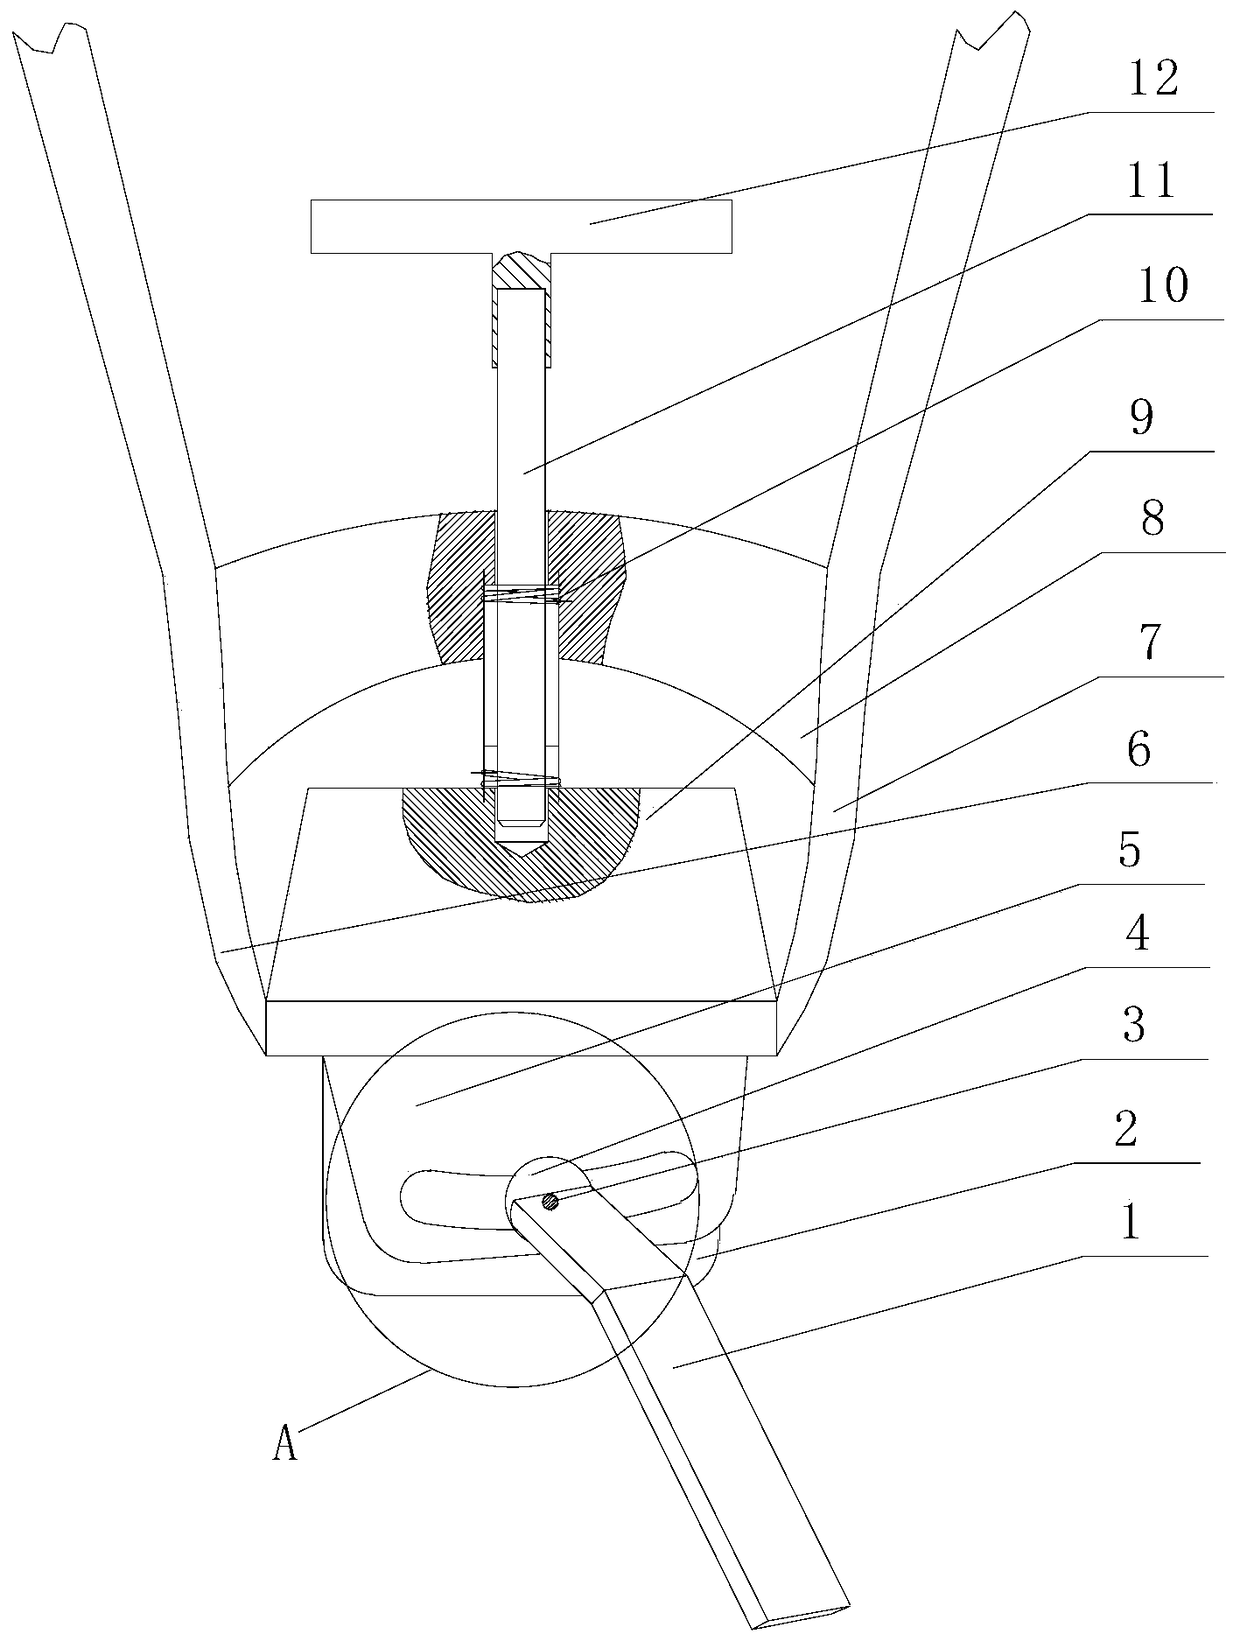 Pitch left and right adjustment device for armrest of rotary tiller